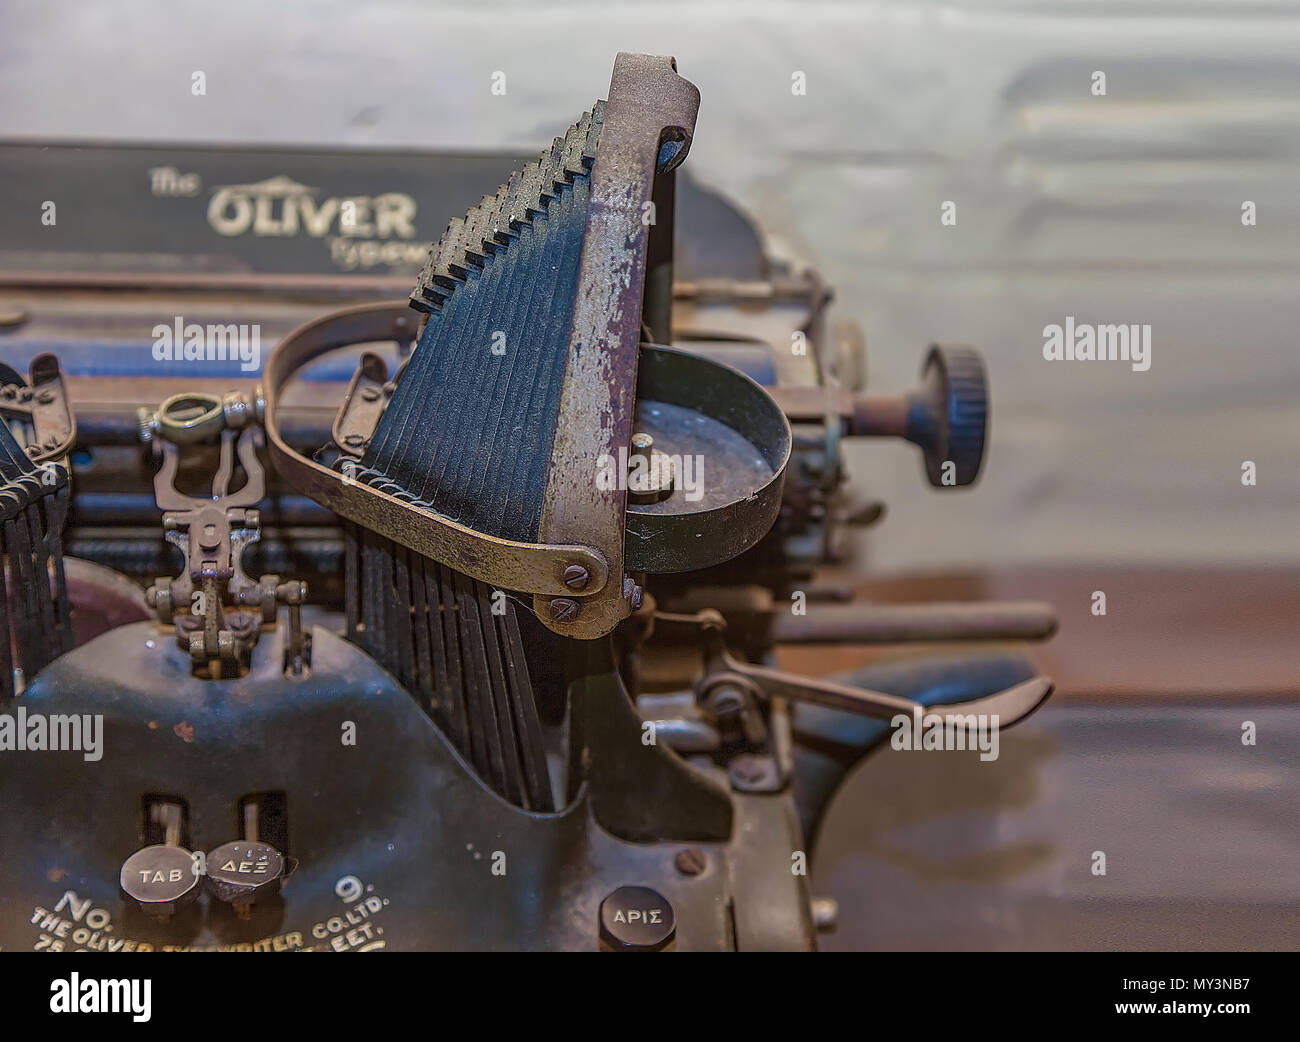 The Oliver Typewriter Company was an American typewriter manufacturer headquartered in Chicago, Illinois. It has since been Dissolved .Stock Image Stock Photo